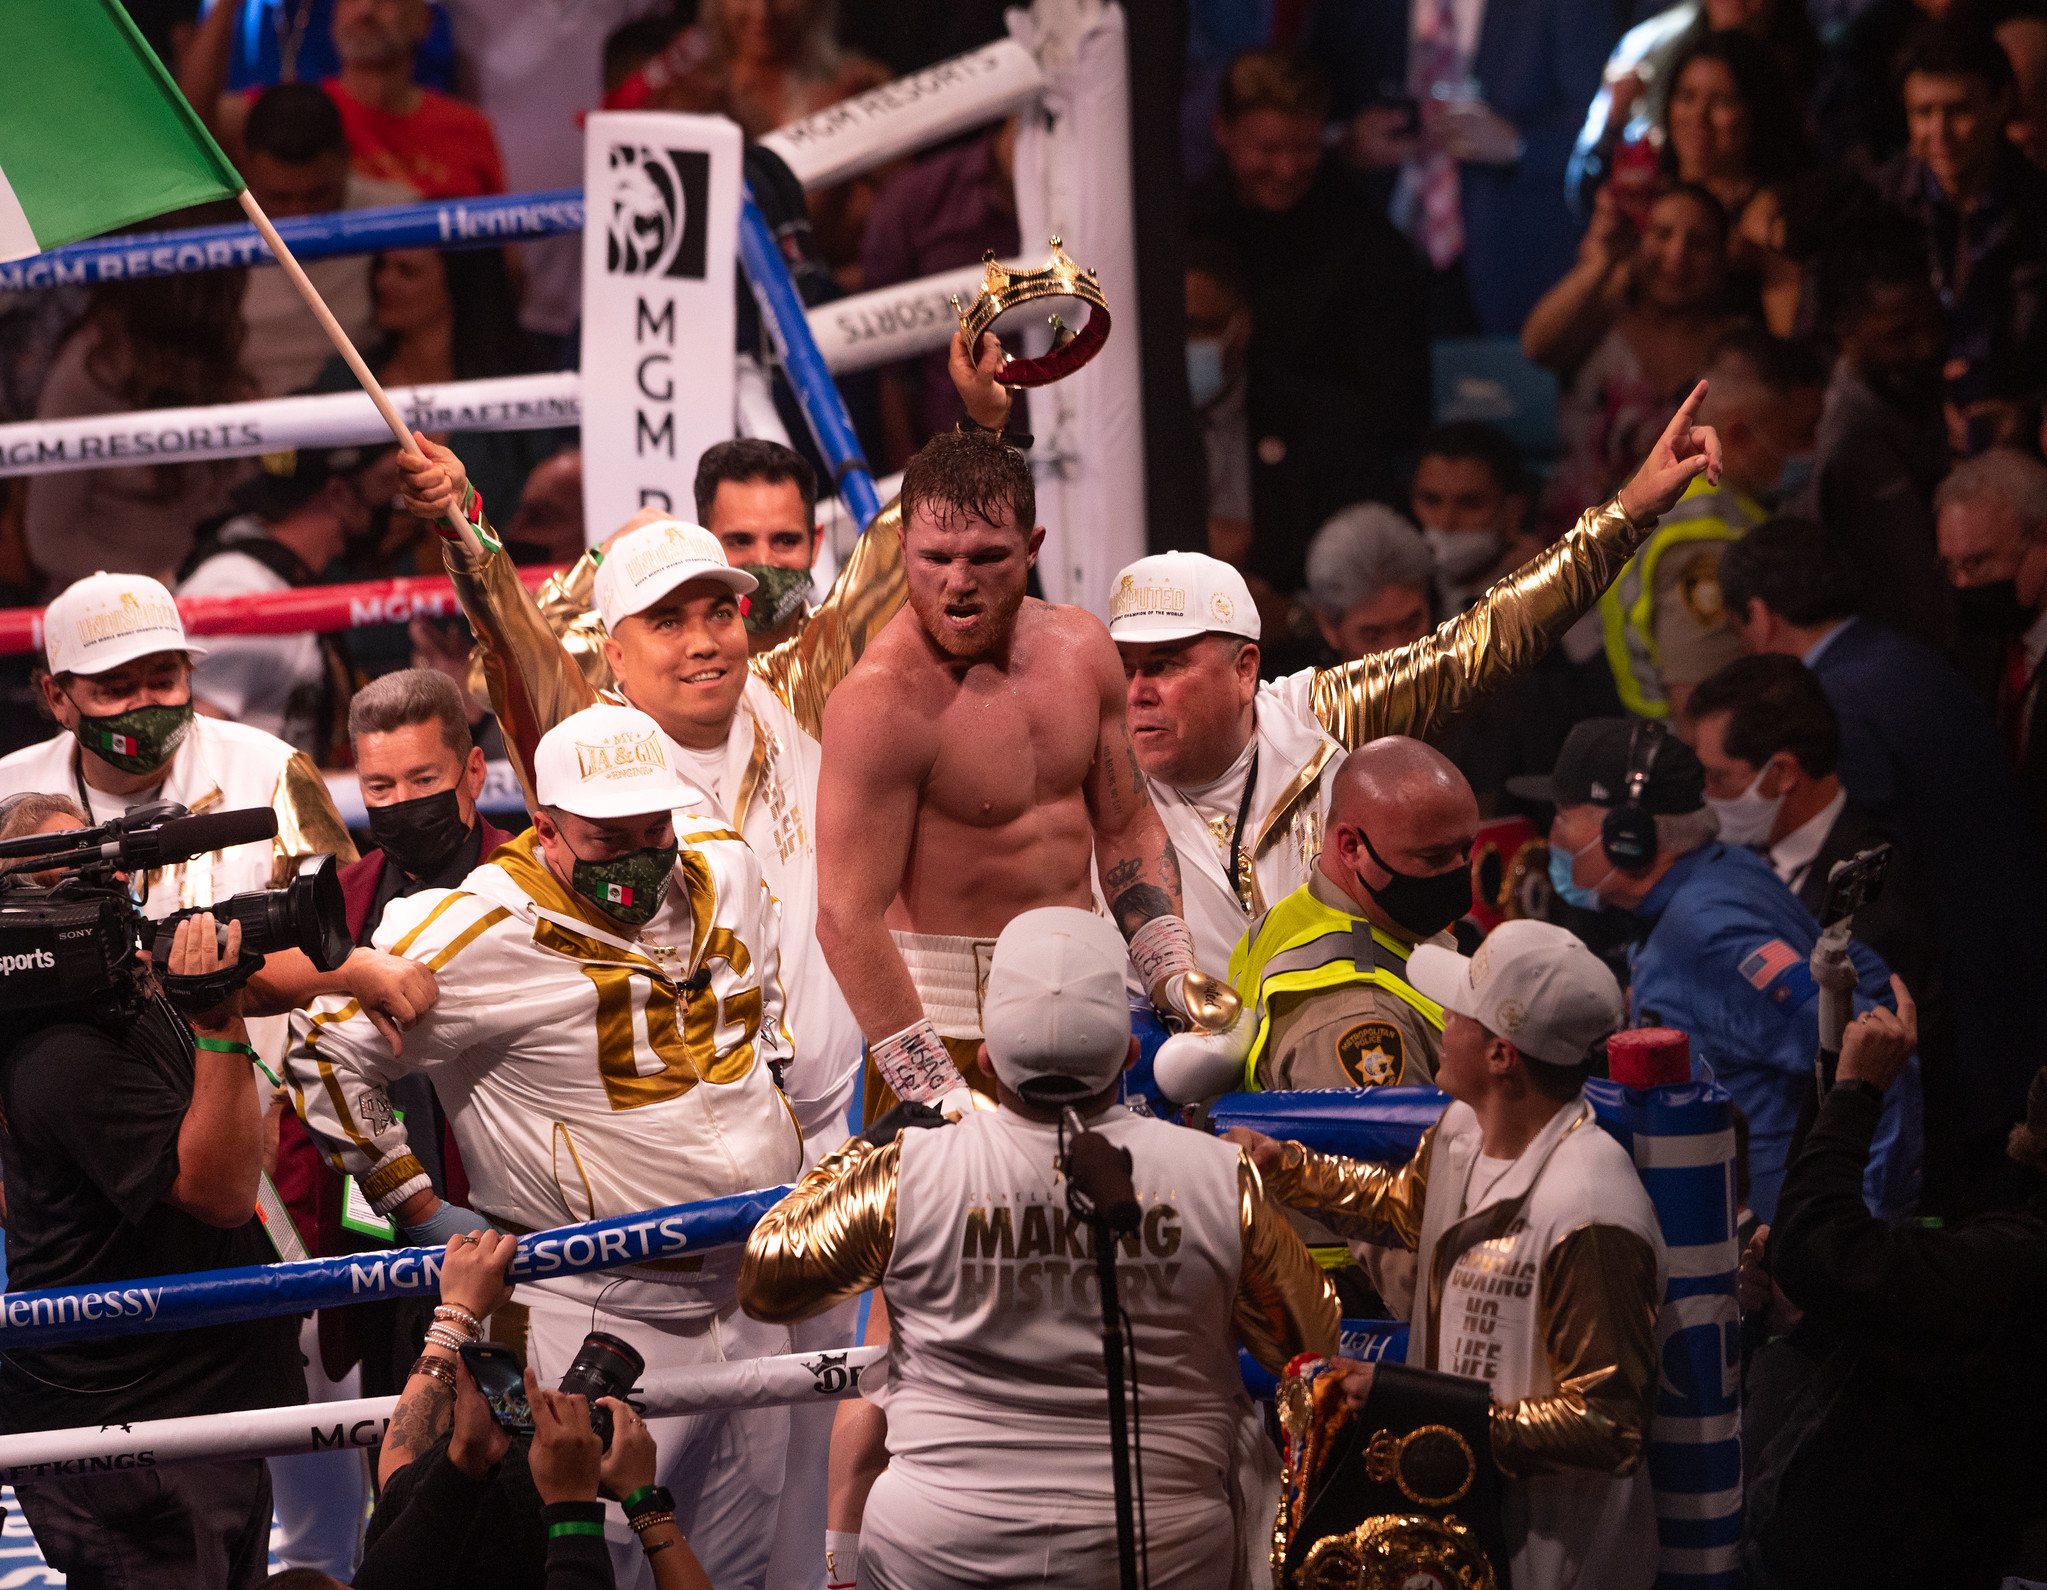 Sold Out Canelo-Plant Fight Draws 16,586 To MGM Grand Garden, With Canelo Defeating Plant With 11th Round TKO